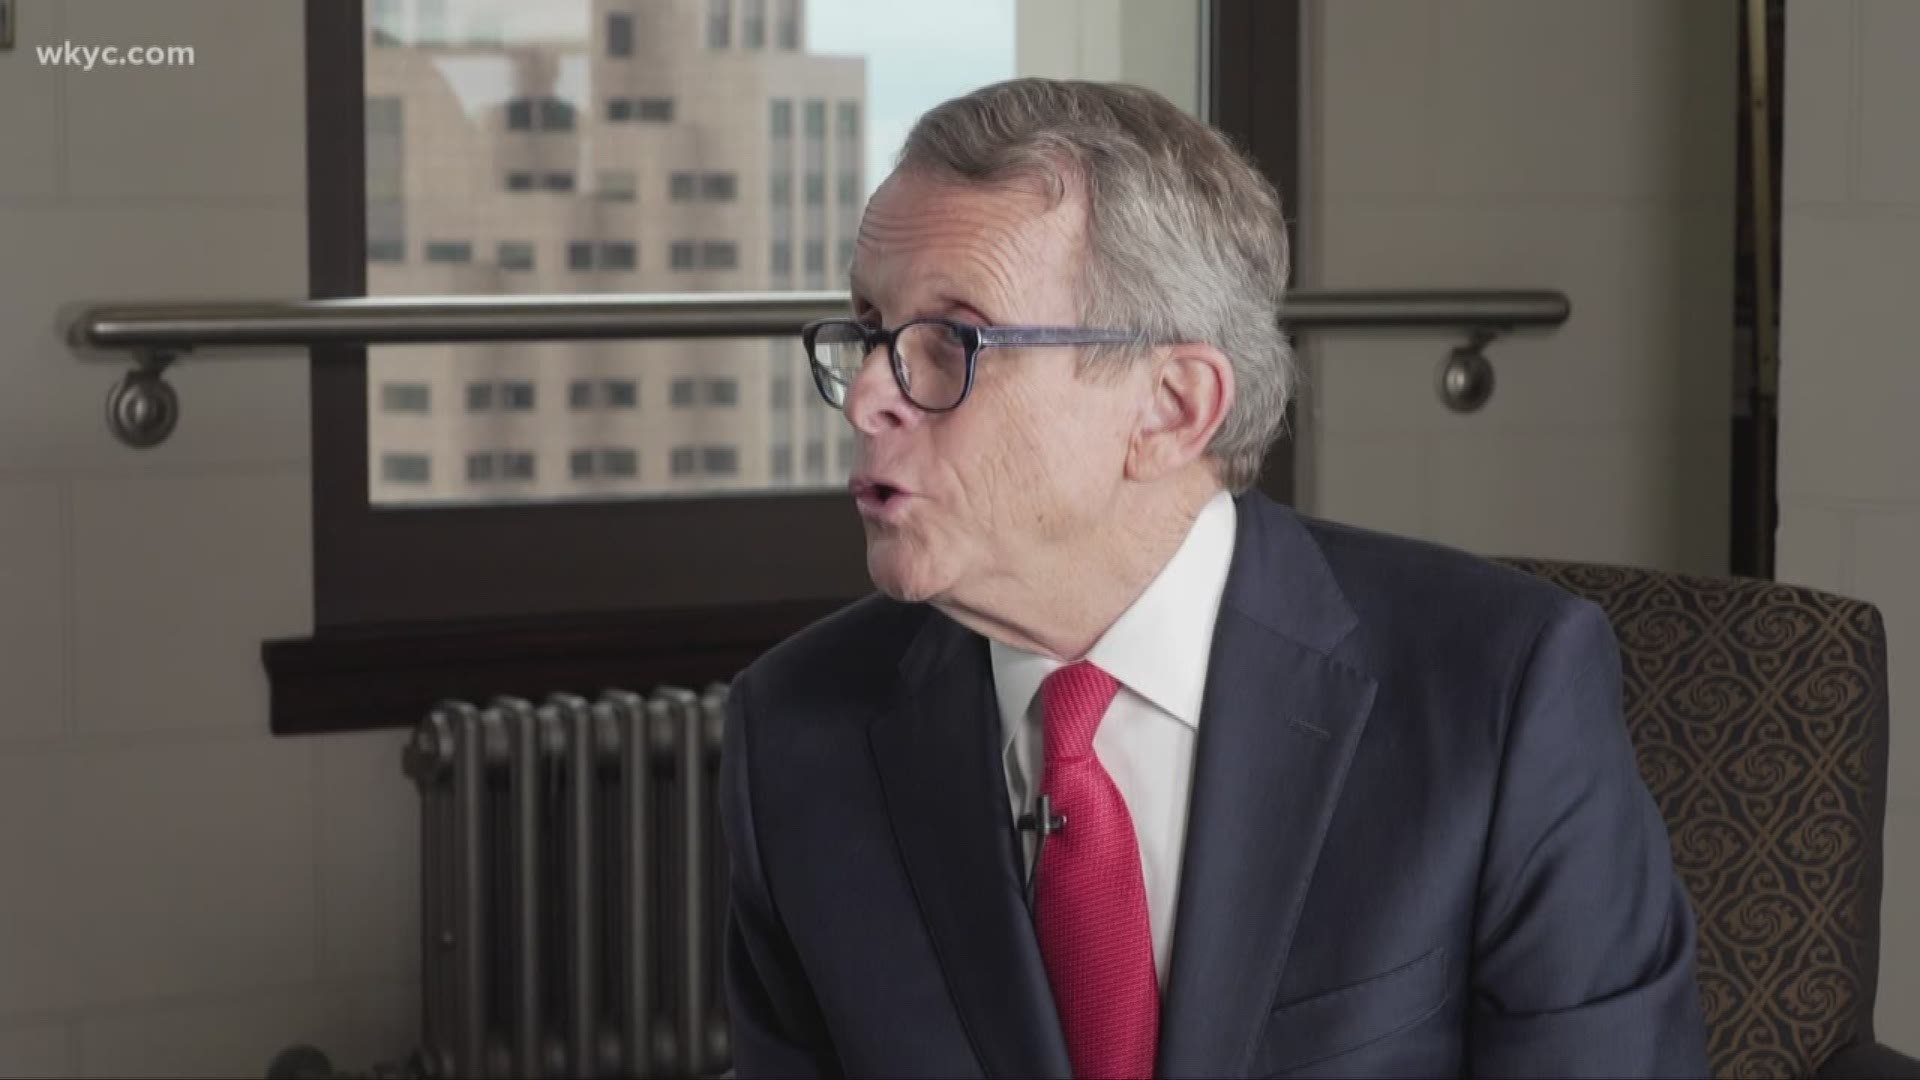 Dave Chudowsky sits down with incoming Ohio Gov. Mike DeWine. See the full interview Thursday morning.